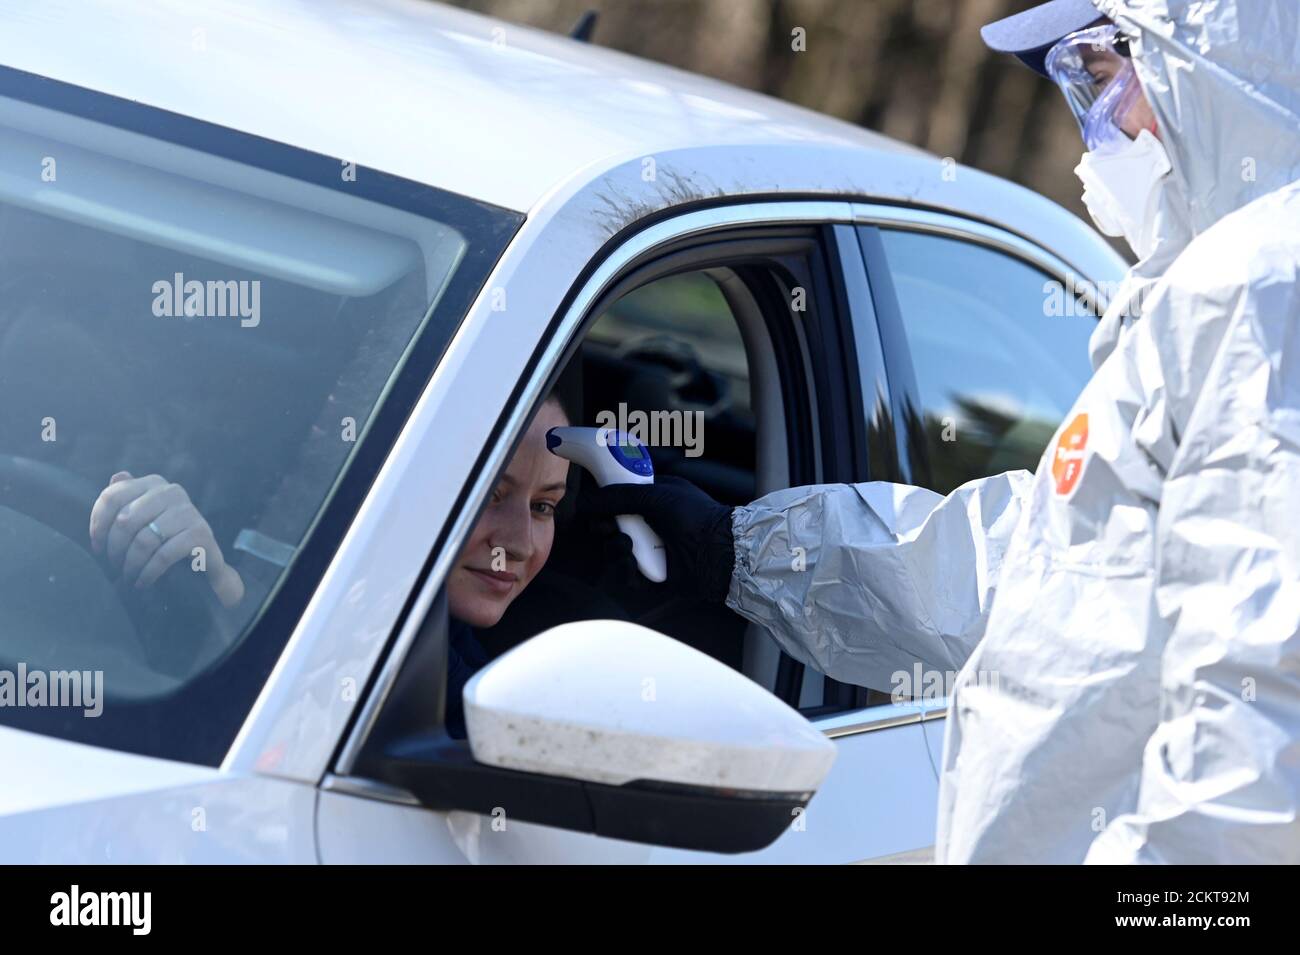 A police officer in a protective suit checks the temperature of a person inside a car at Slovak-Czech border in Drietoma crossing, Slovakia, March 13, 2020. REUTERS/Radovan Stoklasa Stock Photo